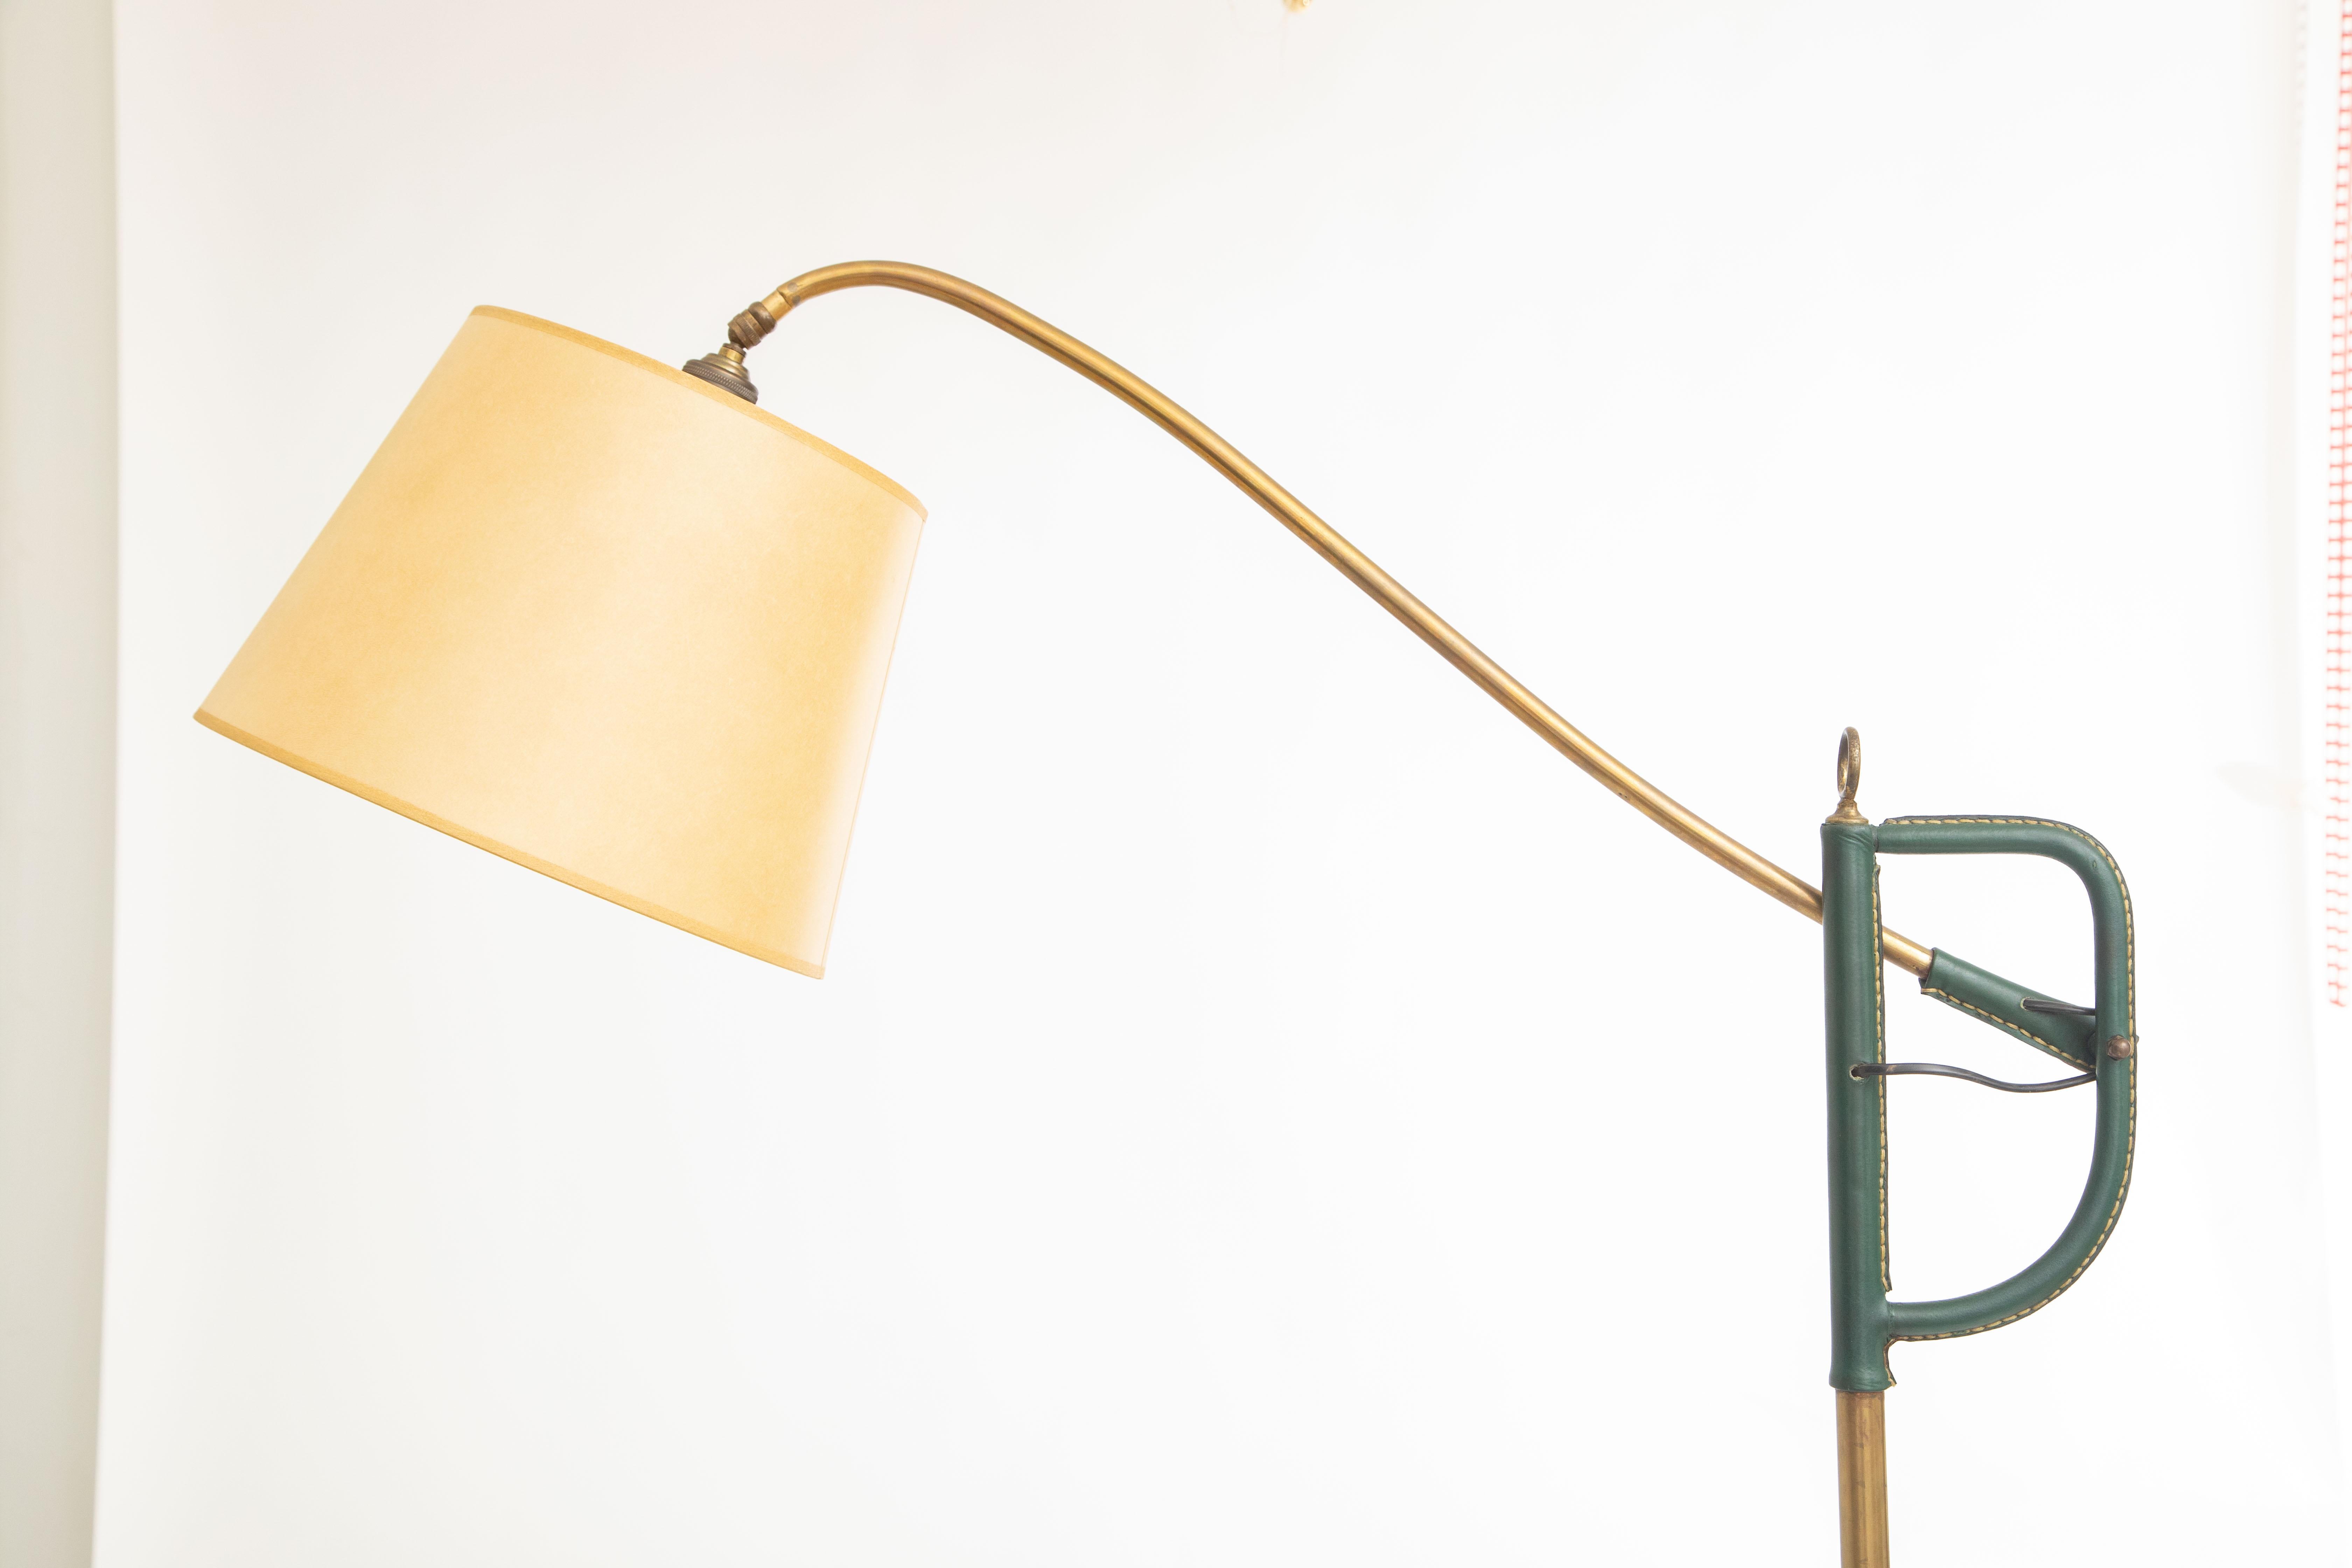 Hunter Green Stitched Leather and Brass Floor Lamp by Jacques Adnet, France 1950 For Sale 4